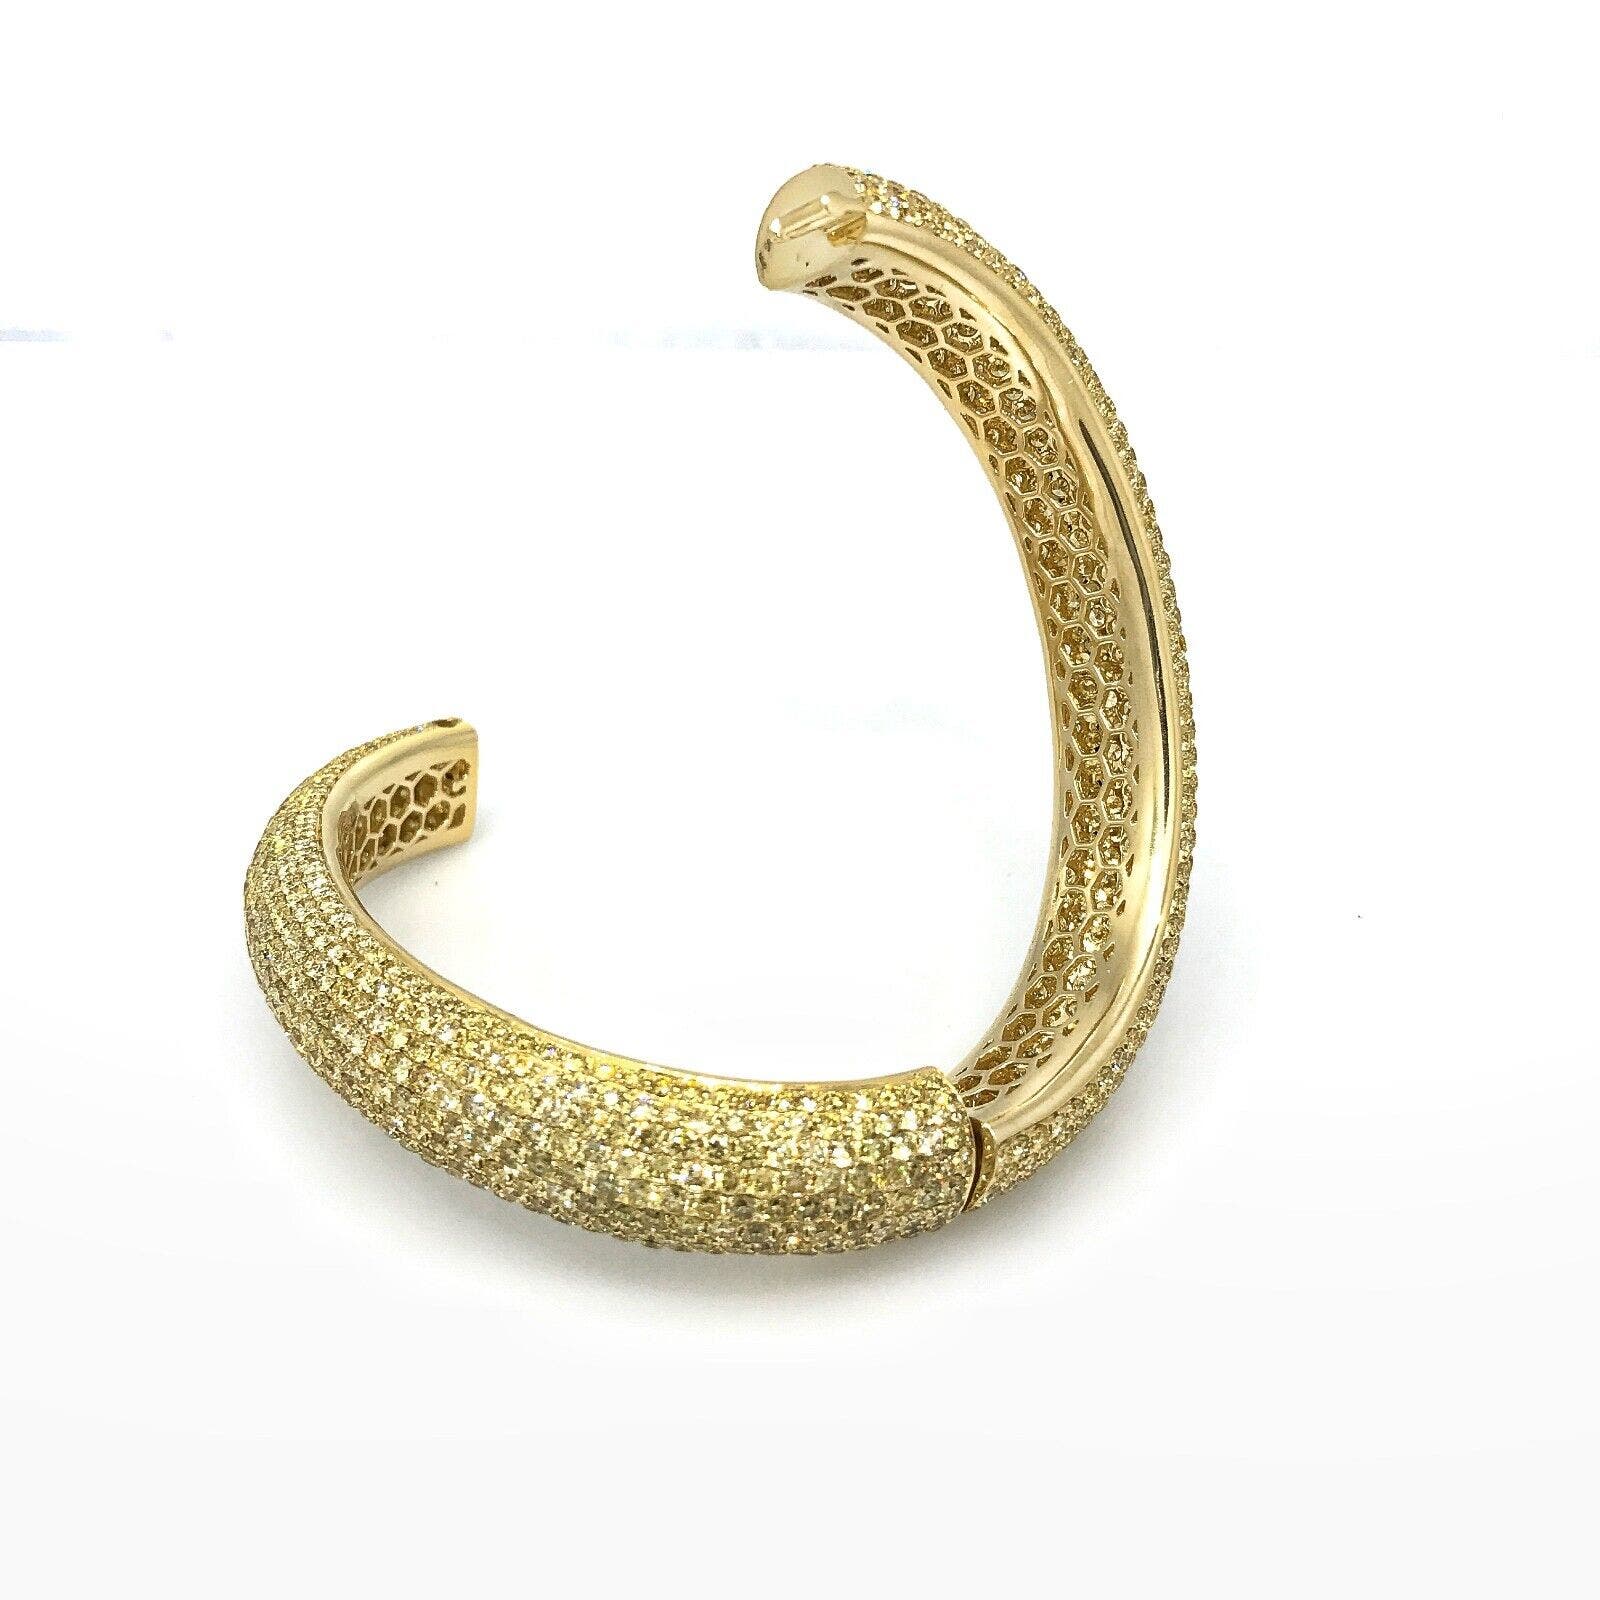 Wide Yellow Diamond Pave Eternity Bracelet 24.36 cttw in 18k Yellow Gold-HM1850A